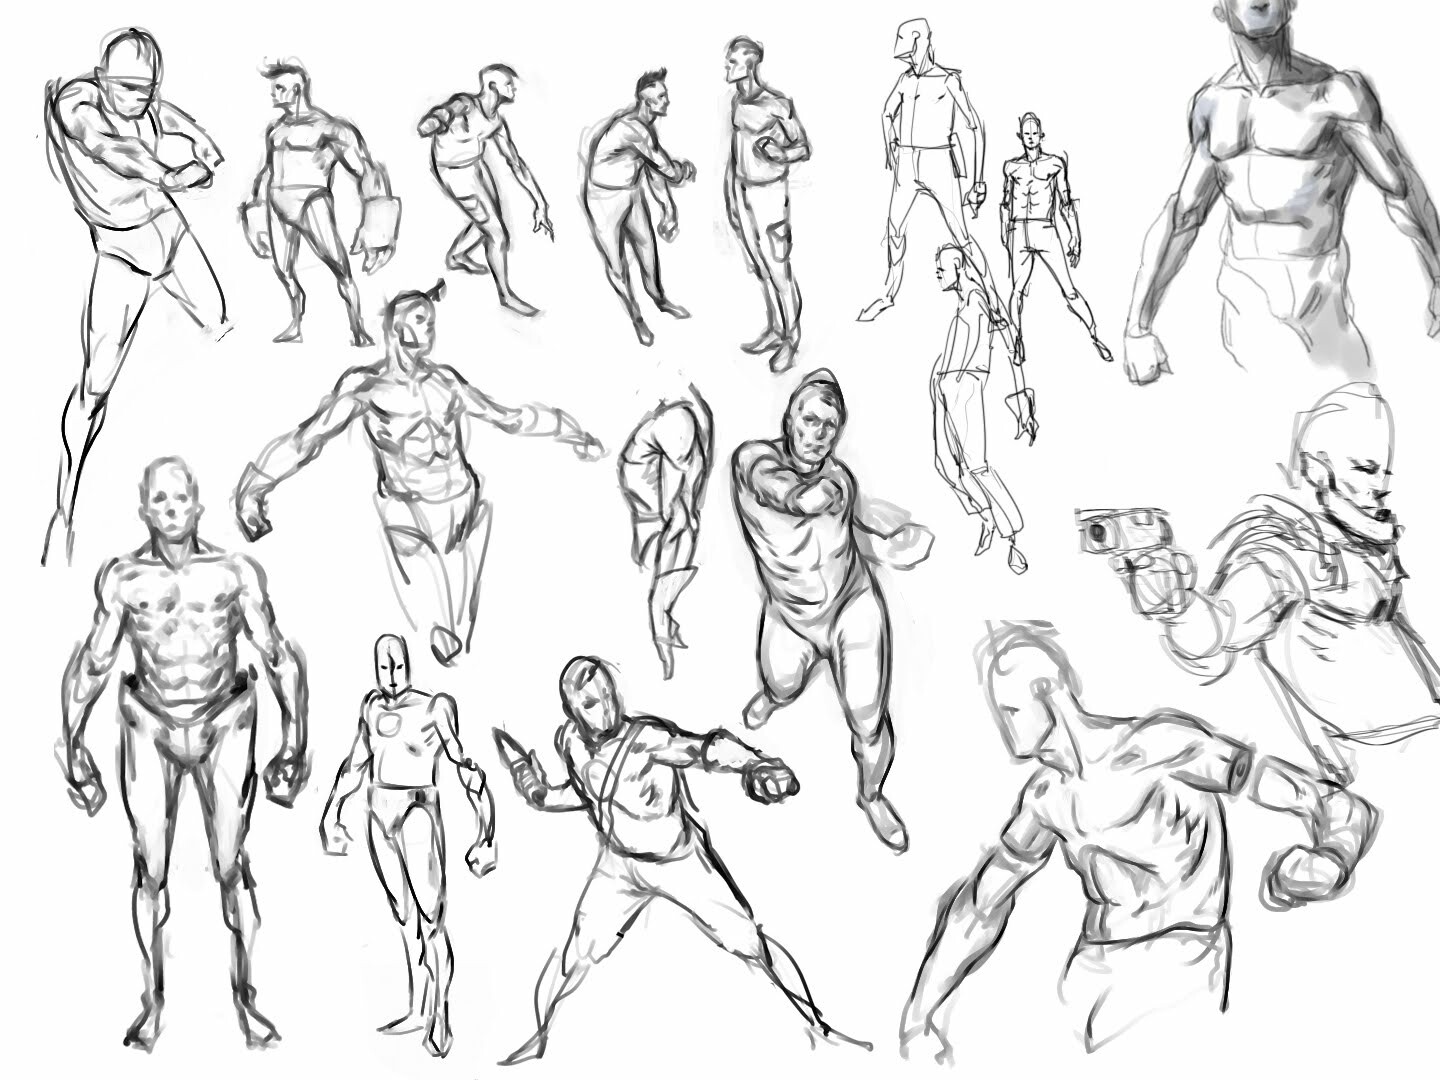 ArtStation - Sketches and Studies